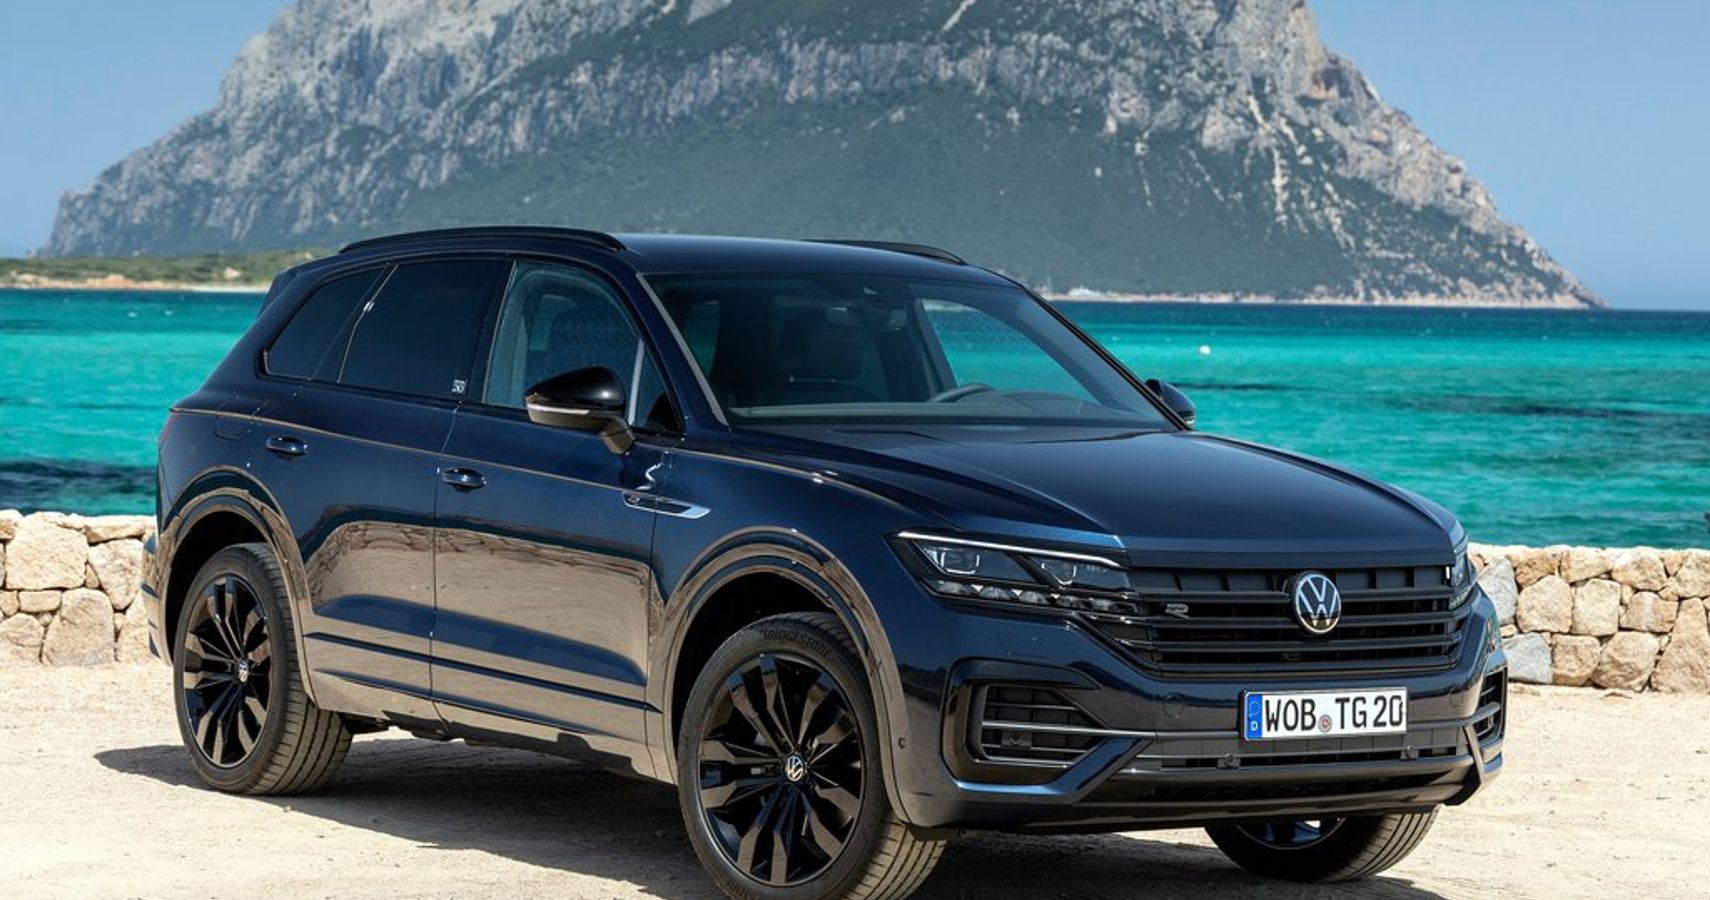 Volkswagen Touareg Edition 20 Looks Awesome In A Special Shade Of Meloe